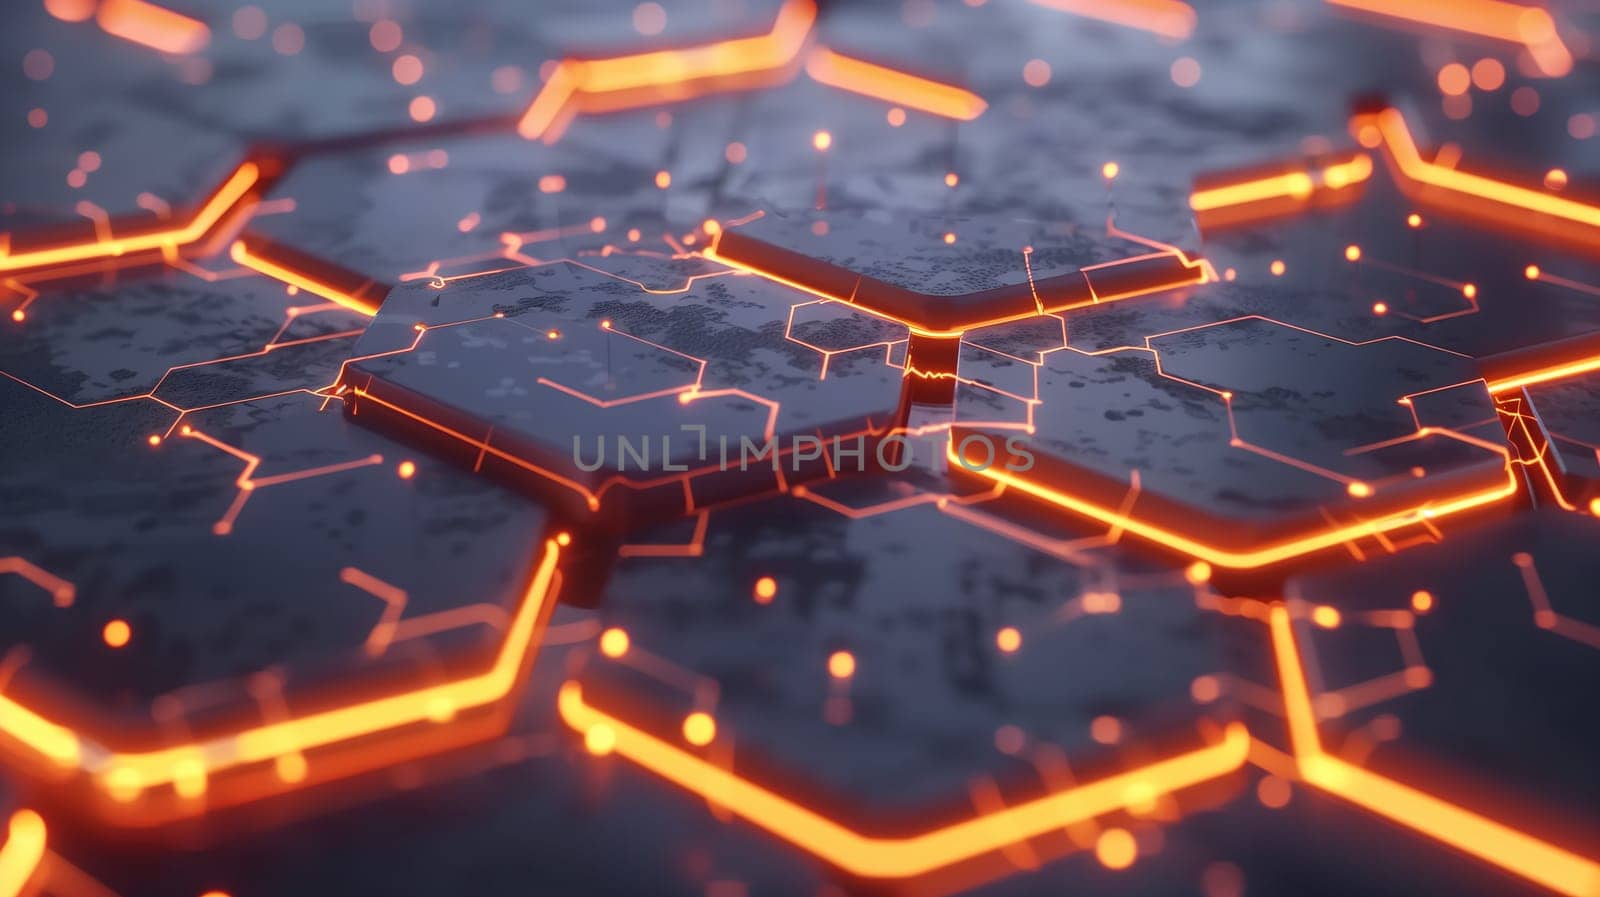 A close-up view of a circuit board with illuminated, orange pathways suggesting digital connectivity and electronic complexity against a dark background - Generative AI